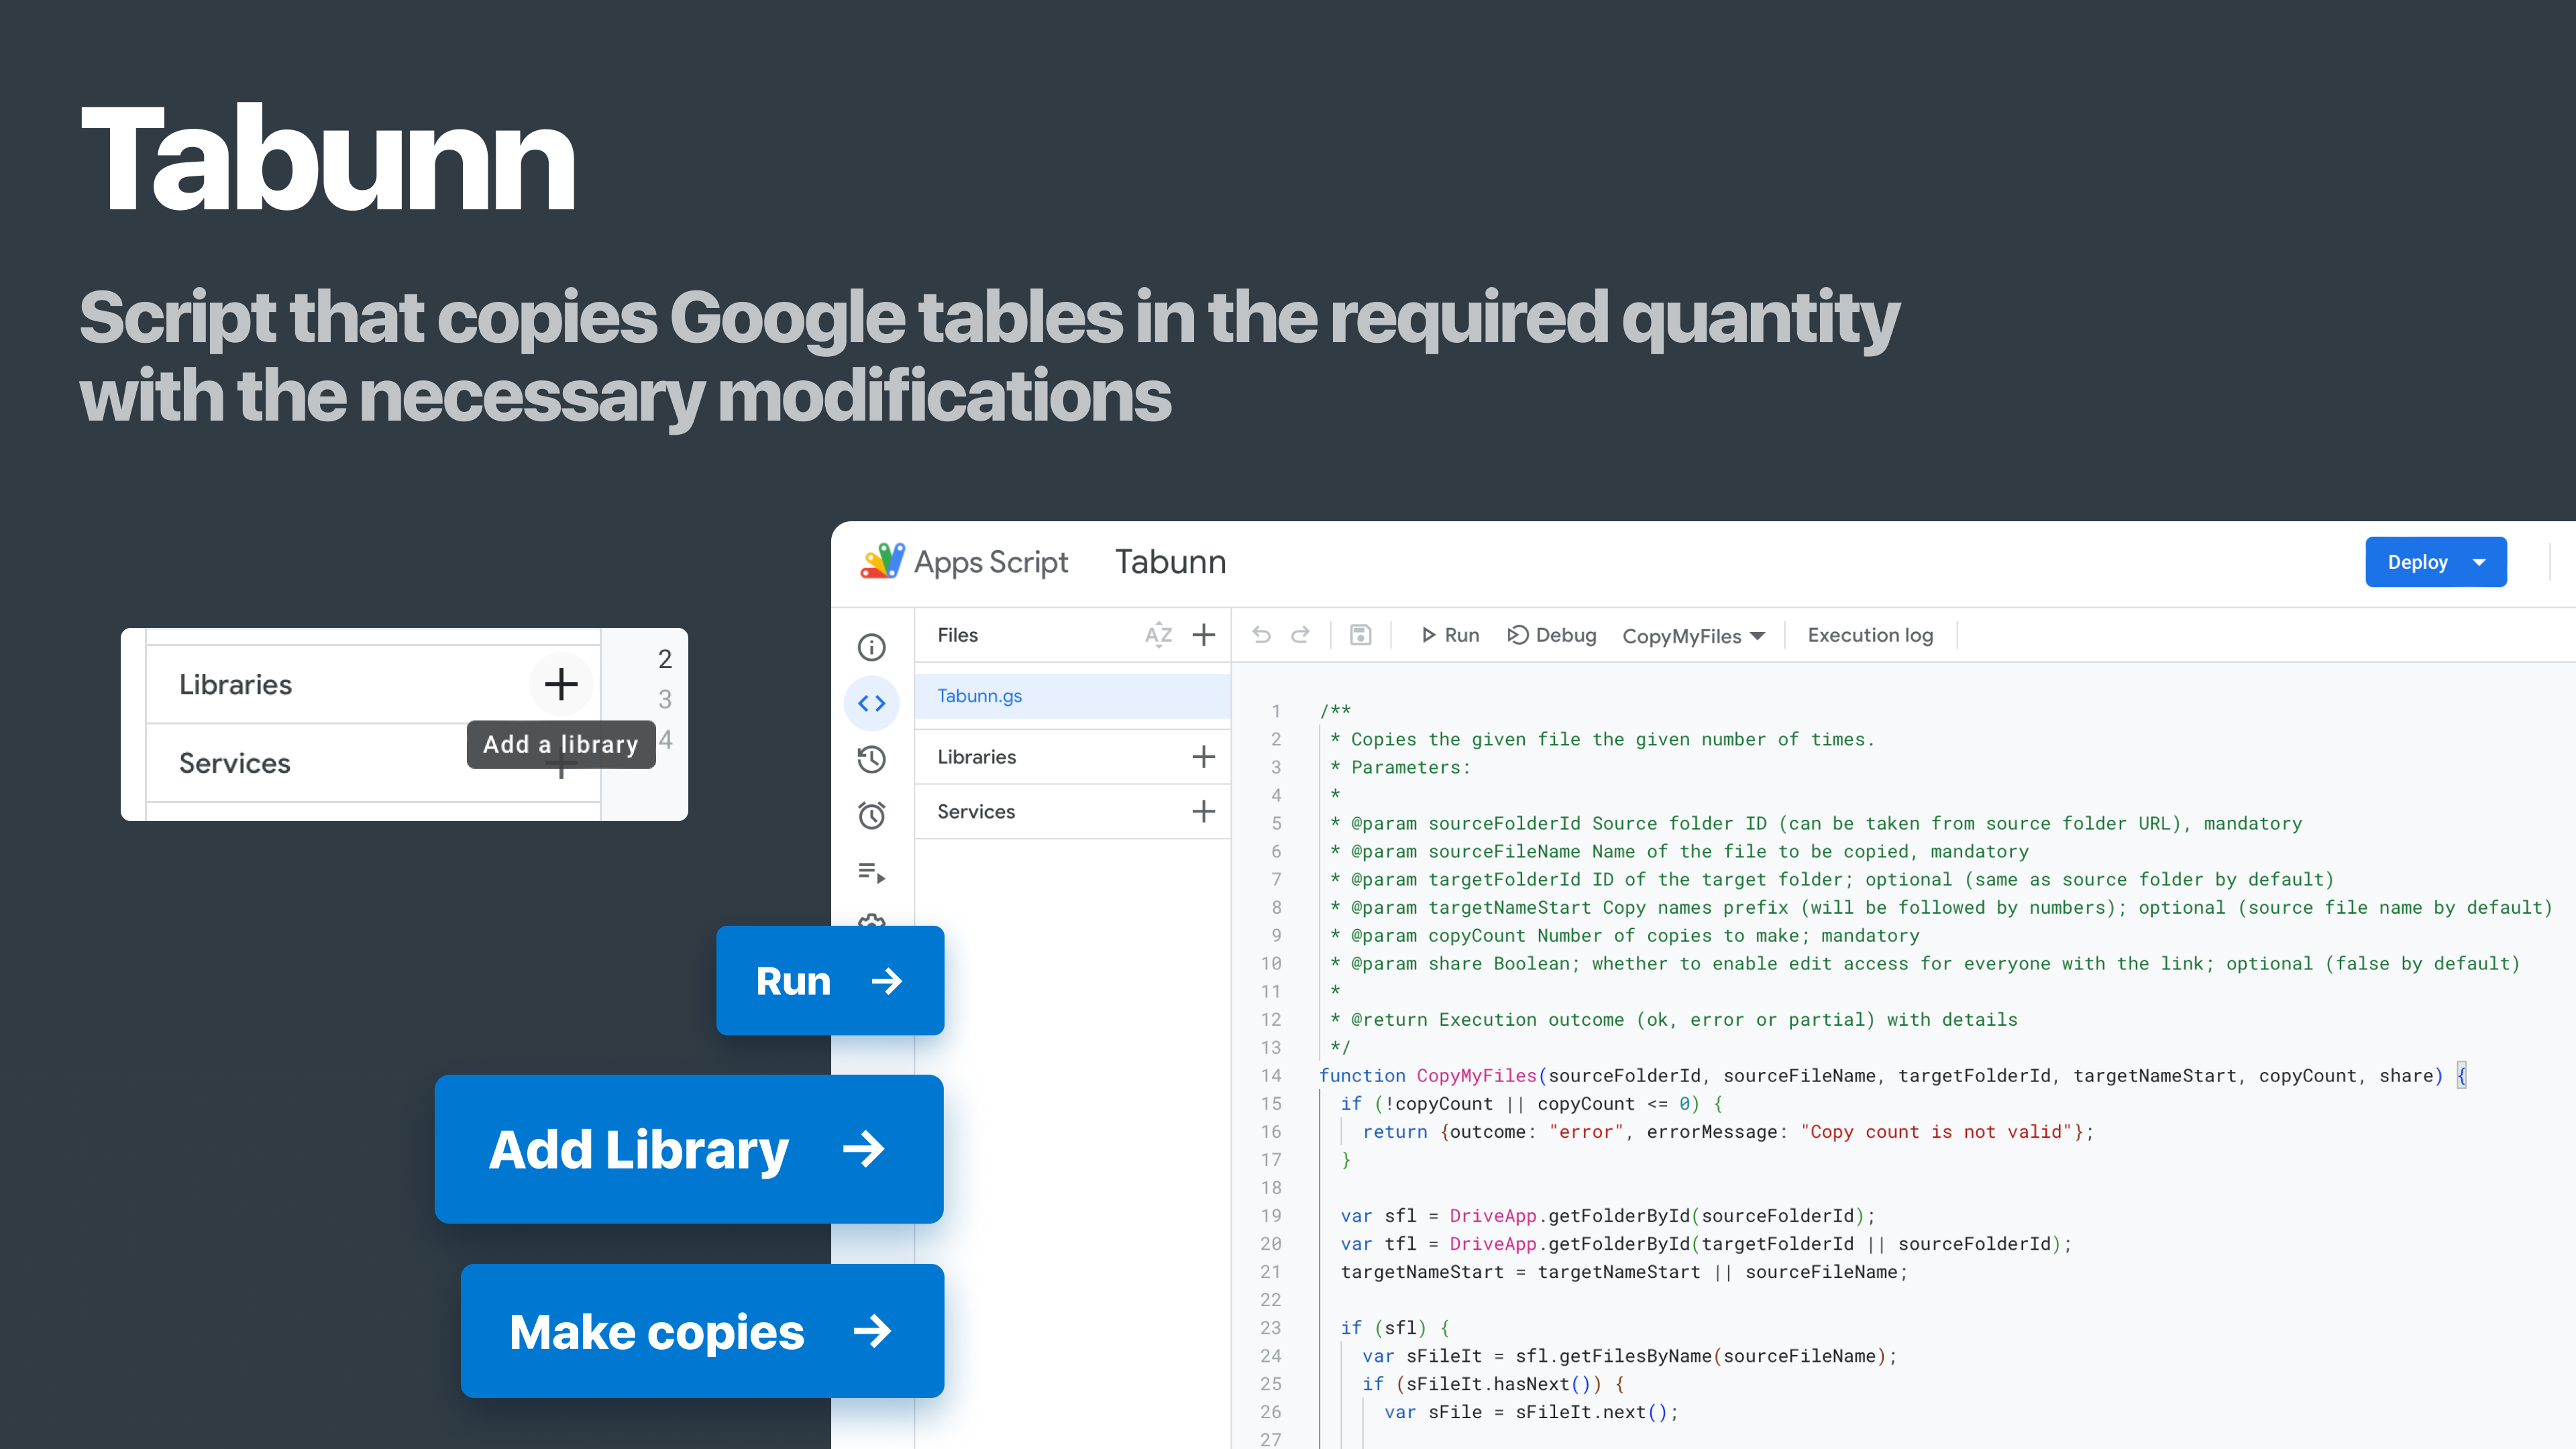 Script that copies Google tables in the required quantity with the necessary modifications (names, numbering, username, etc.).